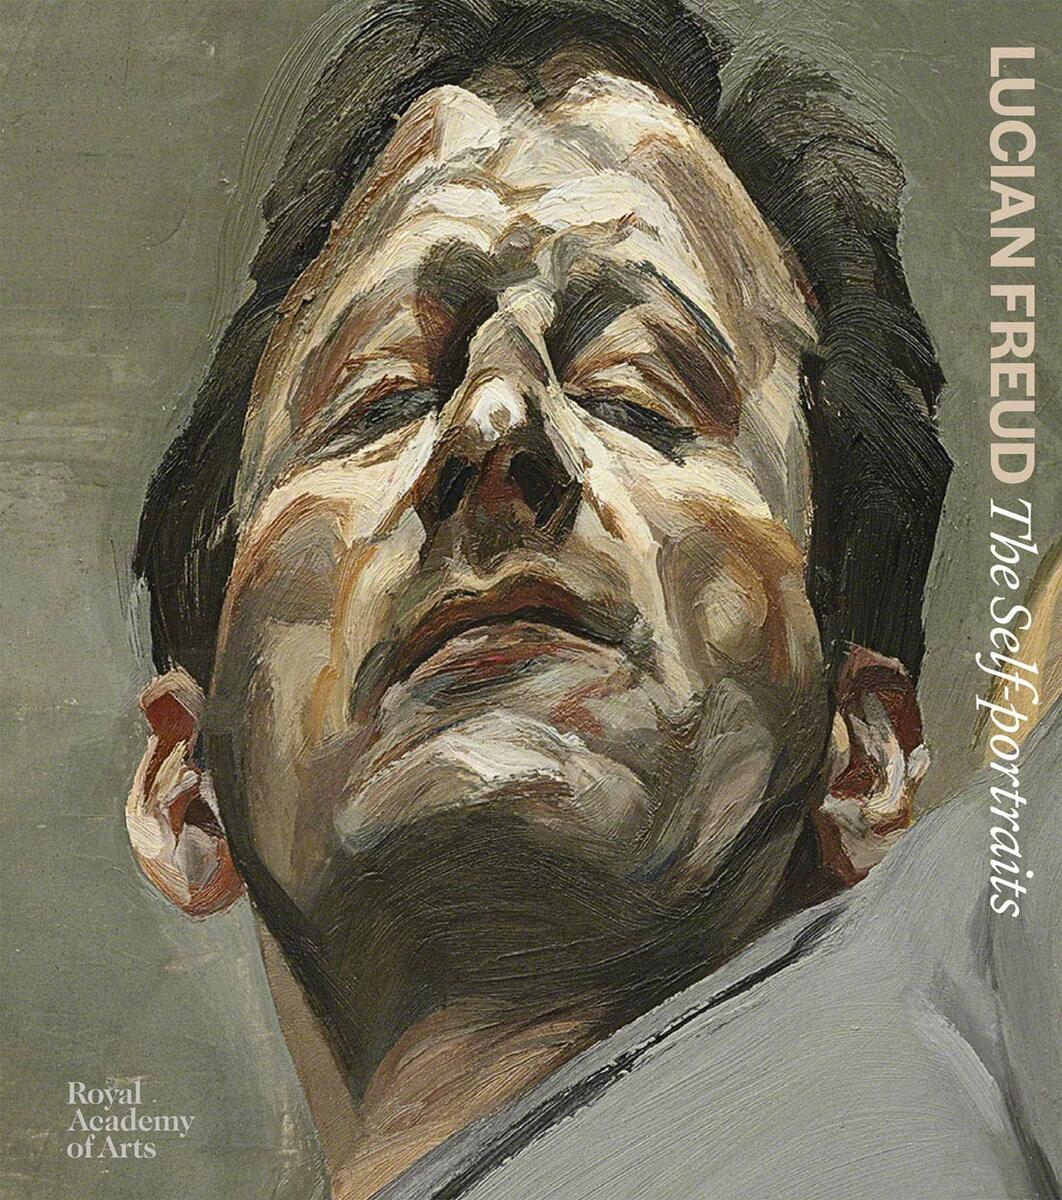 Book recommendation 🎨📖 Lucian Freud: The Self-portraits amzn.to/3Wlqe0k